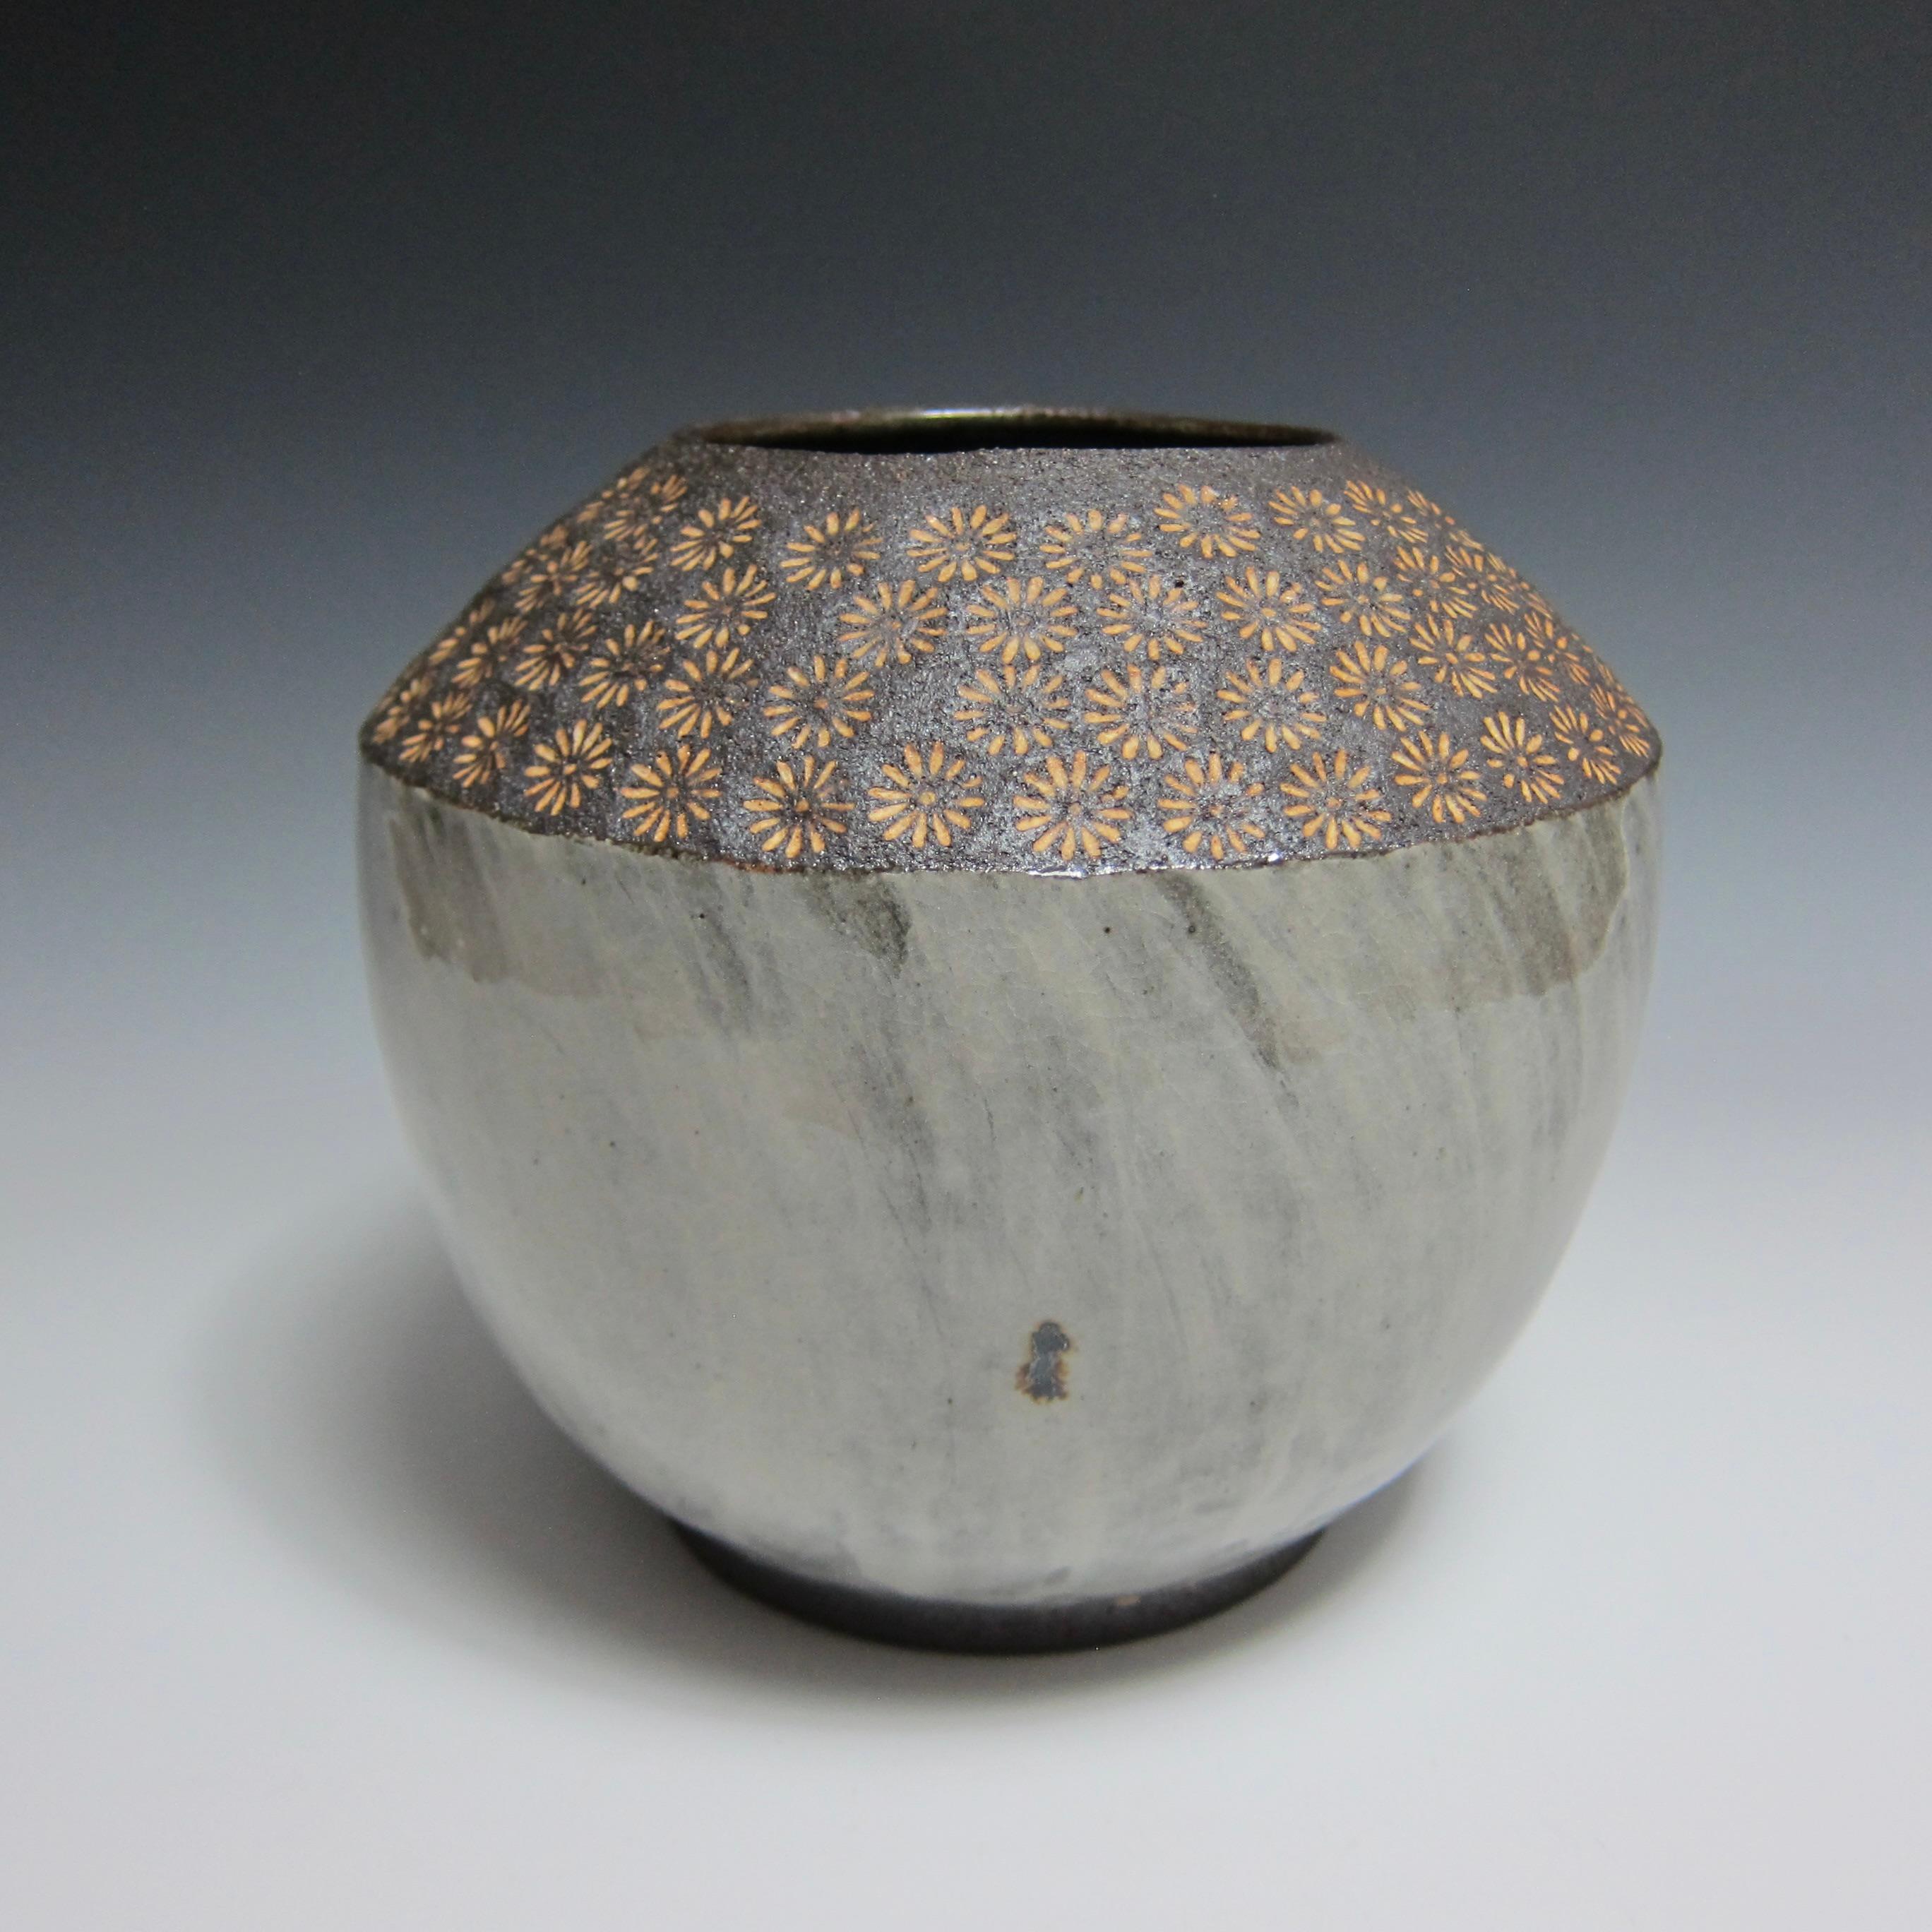 Wheel Thrown Flower Stamped Buncheong Vase by Jason Fox

American Contemporary Ceramic Artist Jason Fox shows his love of Korean Pottery and Buncheong Ware with this Flower Stamped Vase.

This decorative vase was thrown on the wheel with a